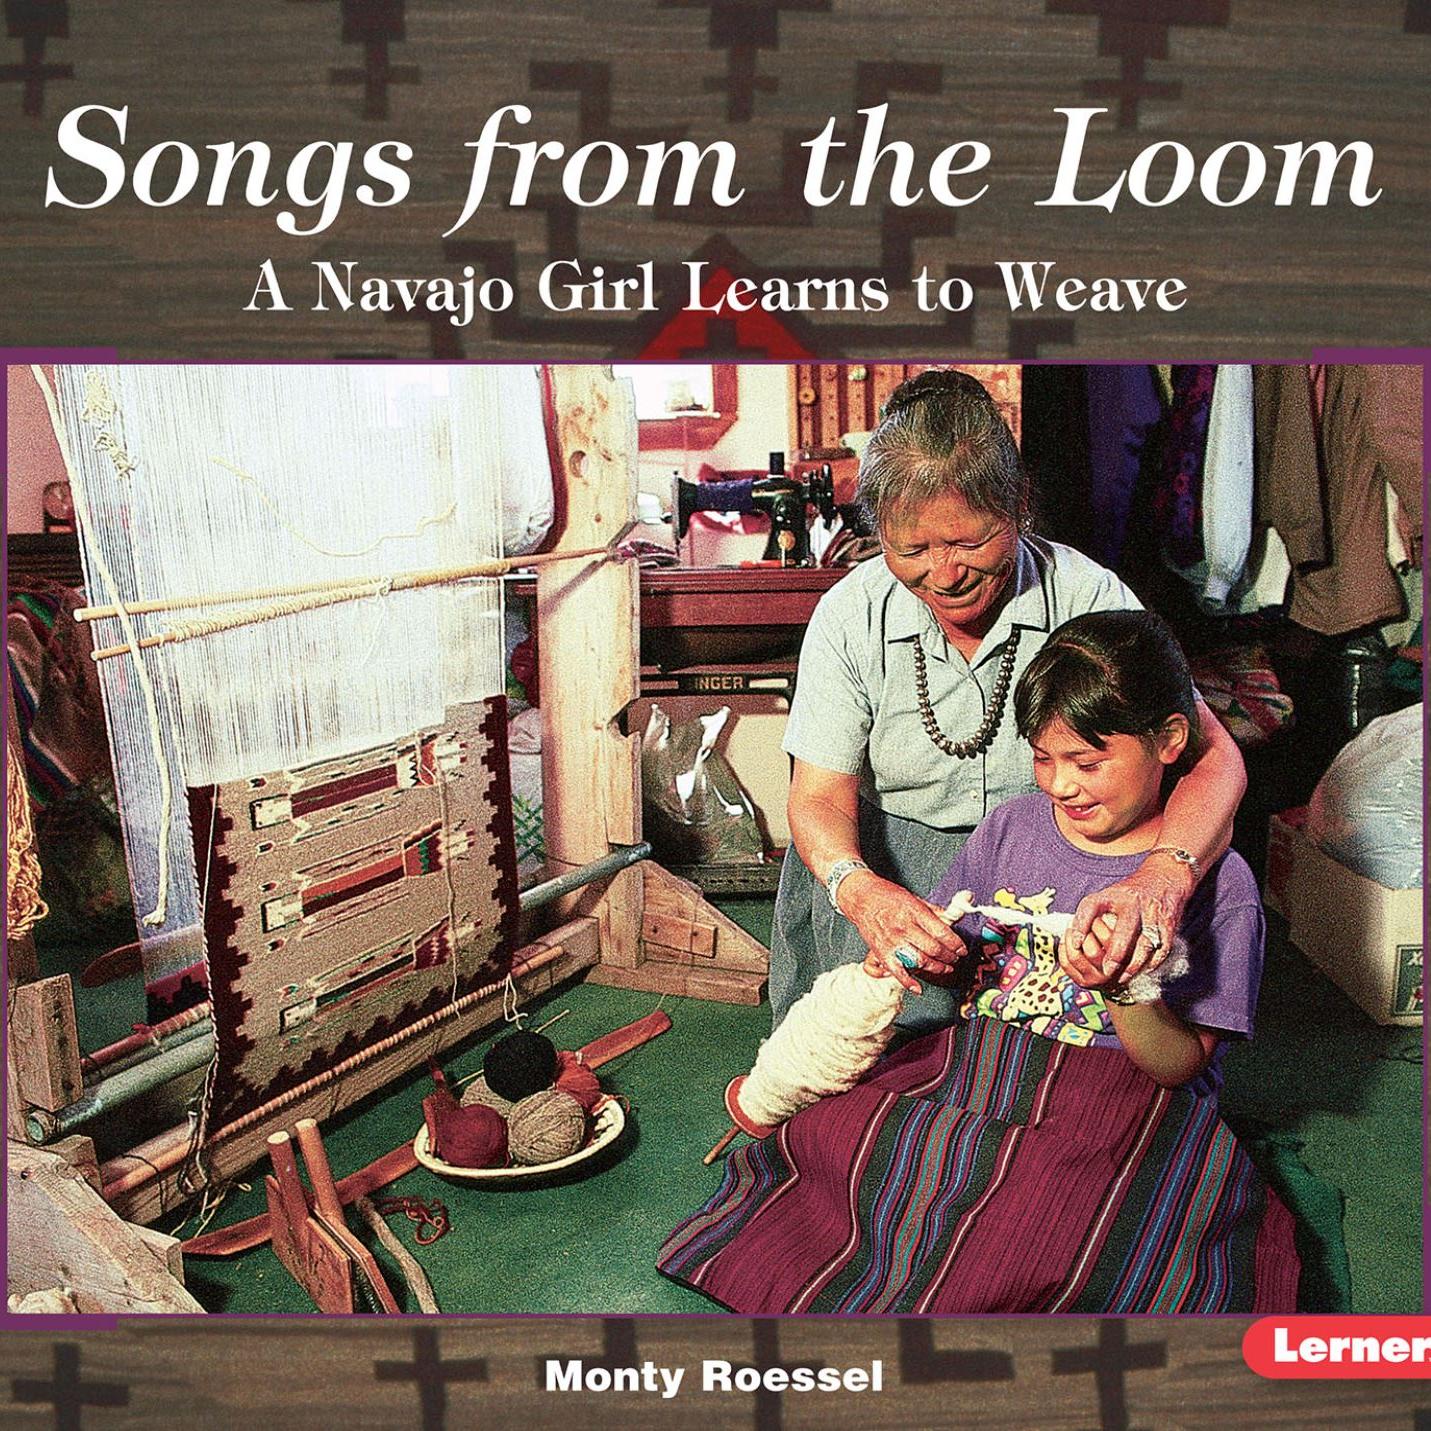 The cover of "Songs from the Loom: A Navajo Girl Learns to Weave," by Monty Roessel. The cover features an image of a child weaving with the help of an older woman.